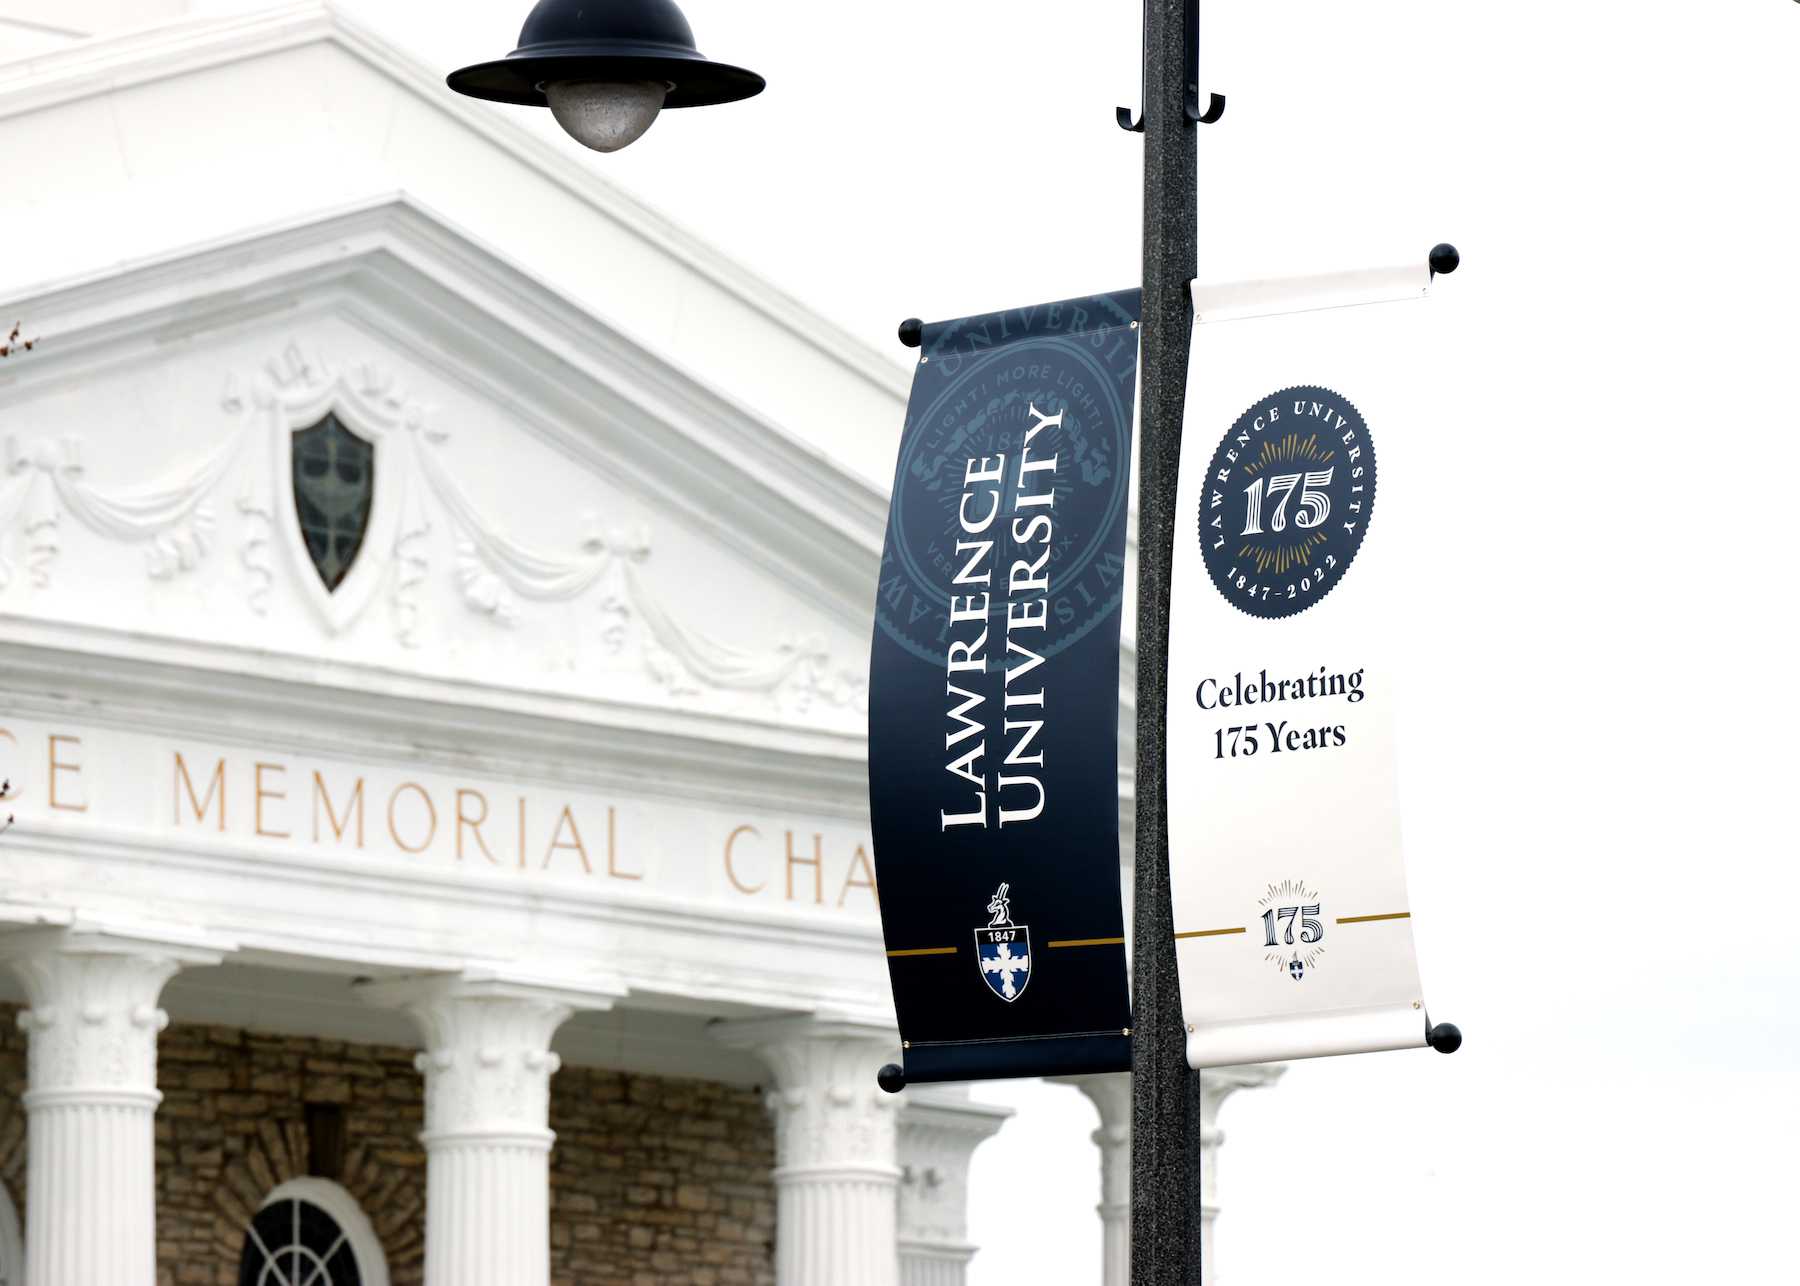 A banner celebrating Lawrence's 175 Years hangs on College Avenue with Memorial Chapel in the background.